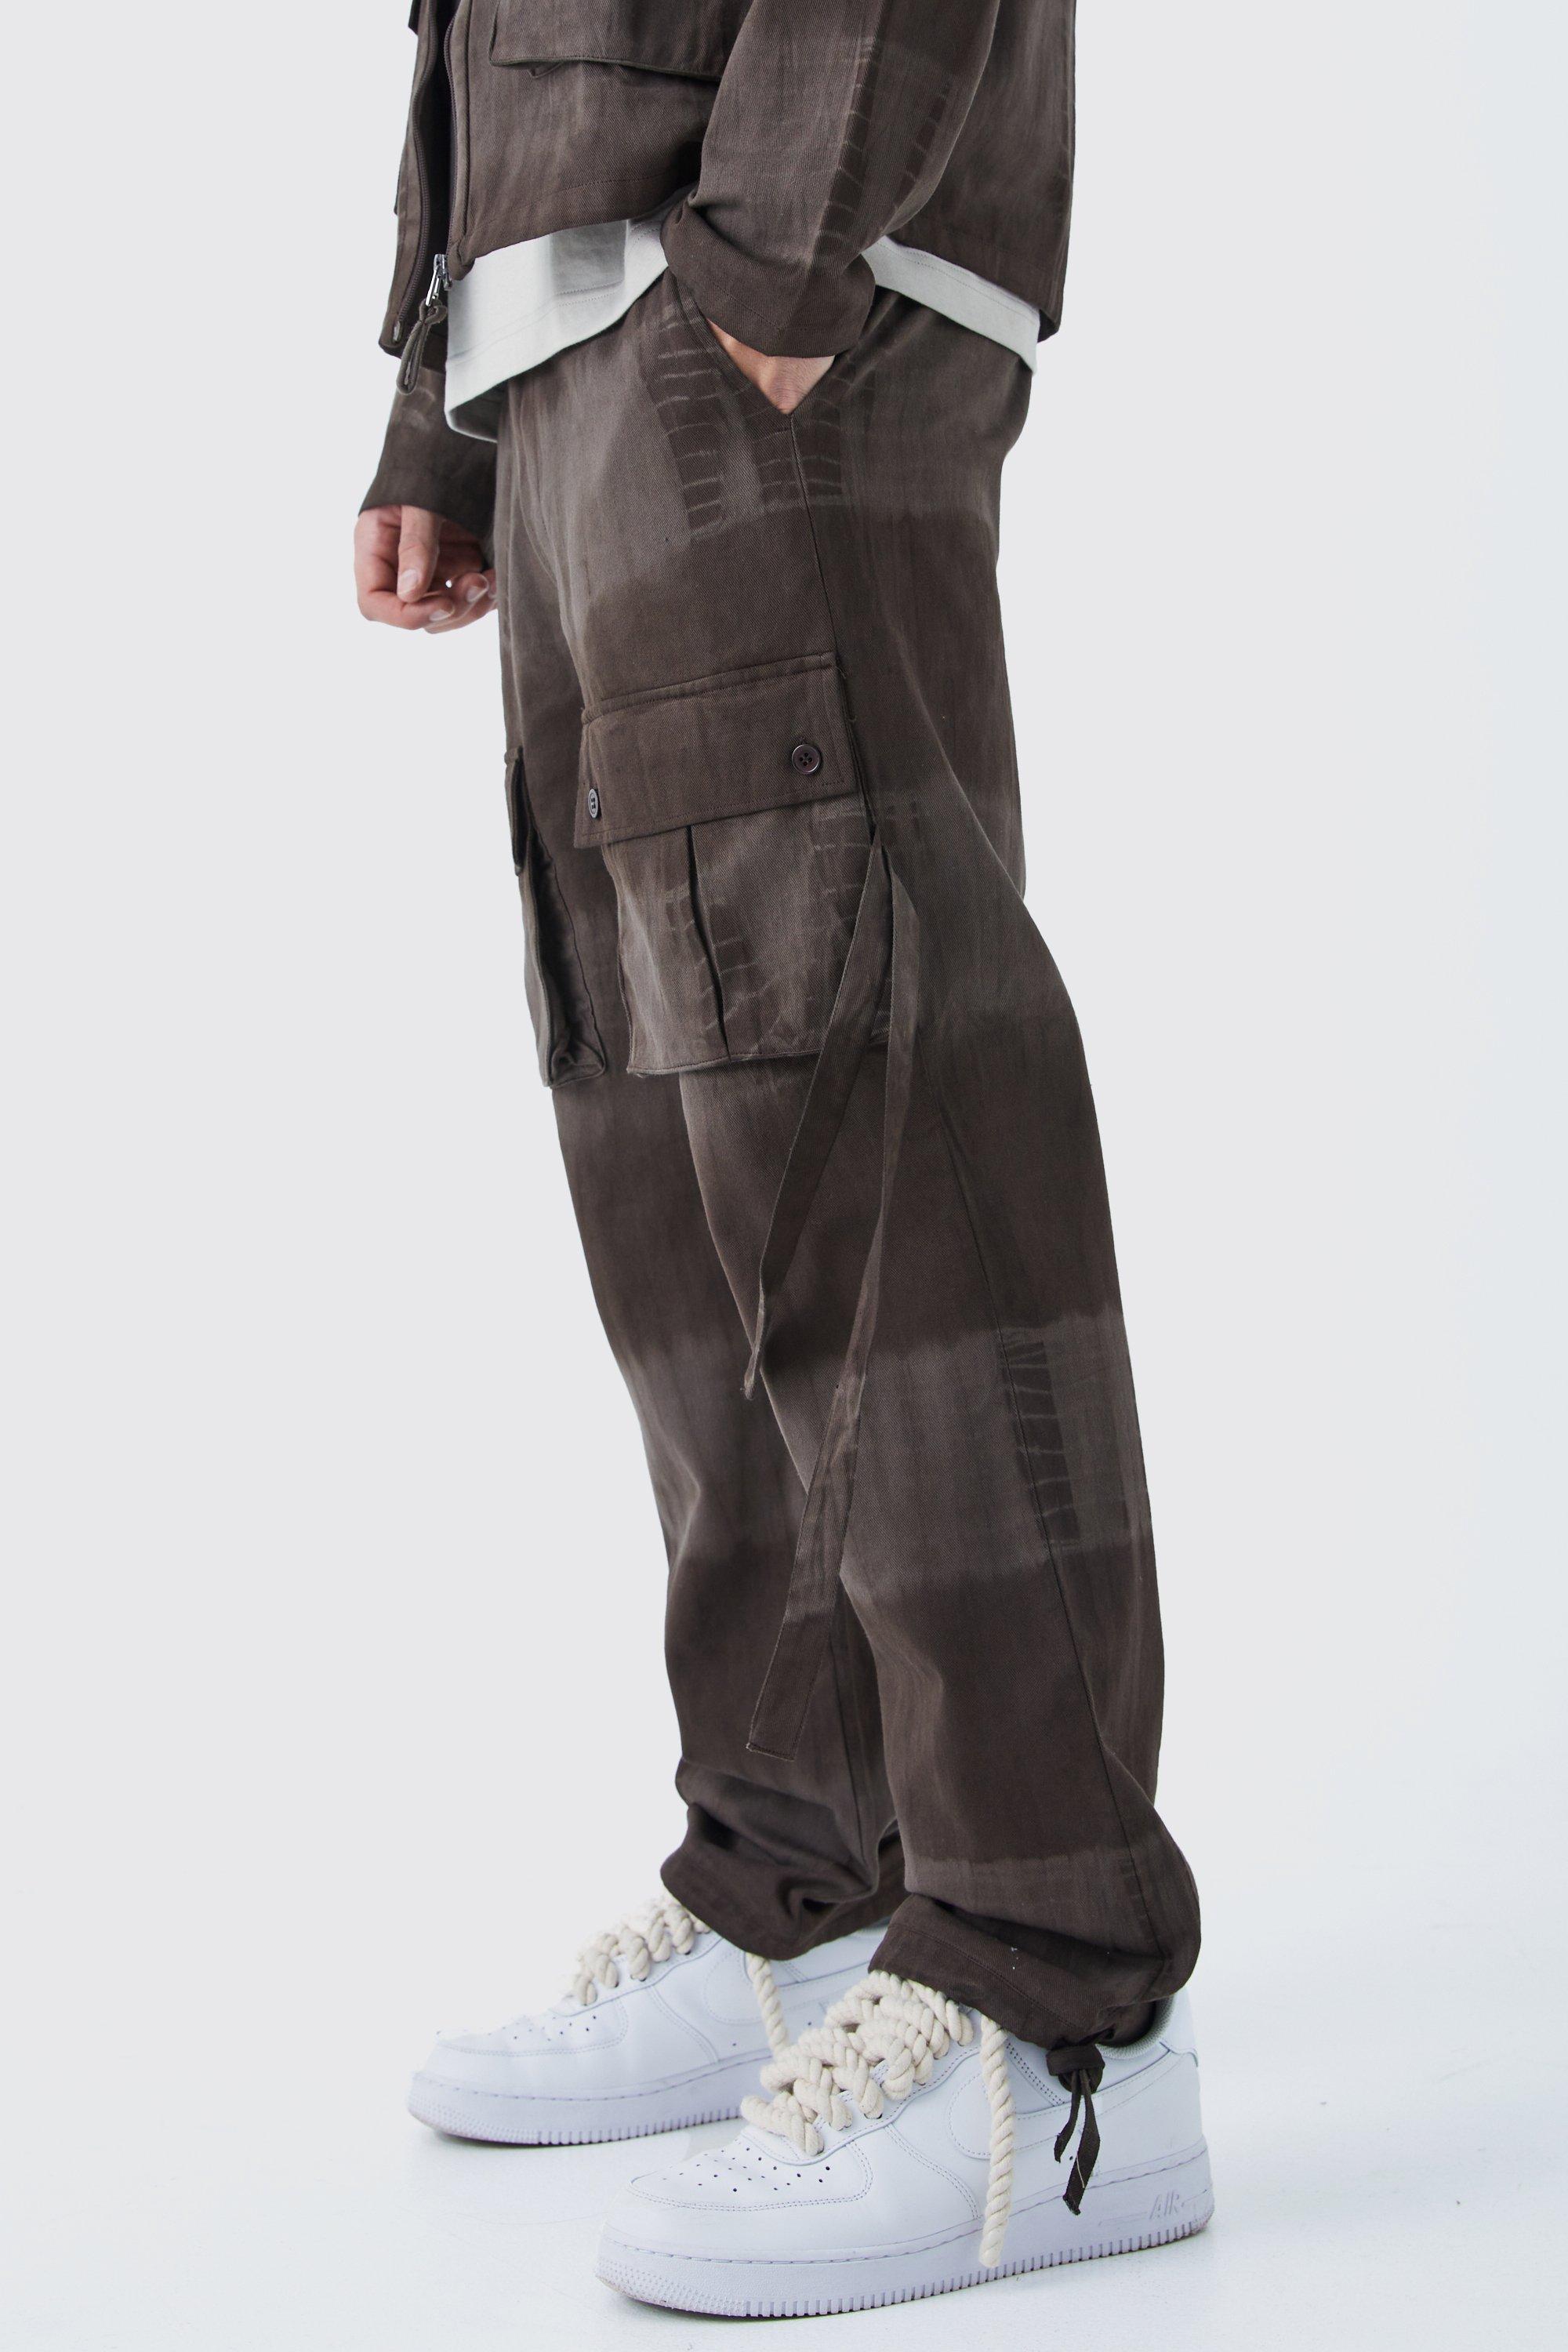 pantalon cargo tie dye à taille fixe homme - taupe - s, taupe